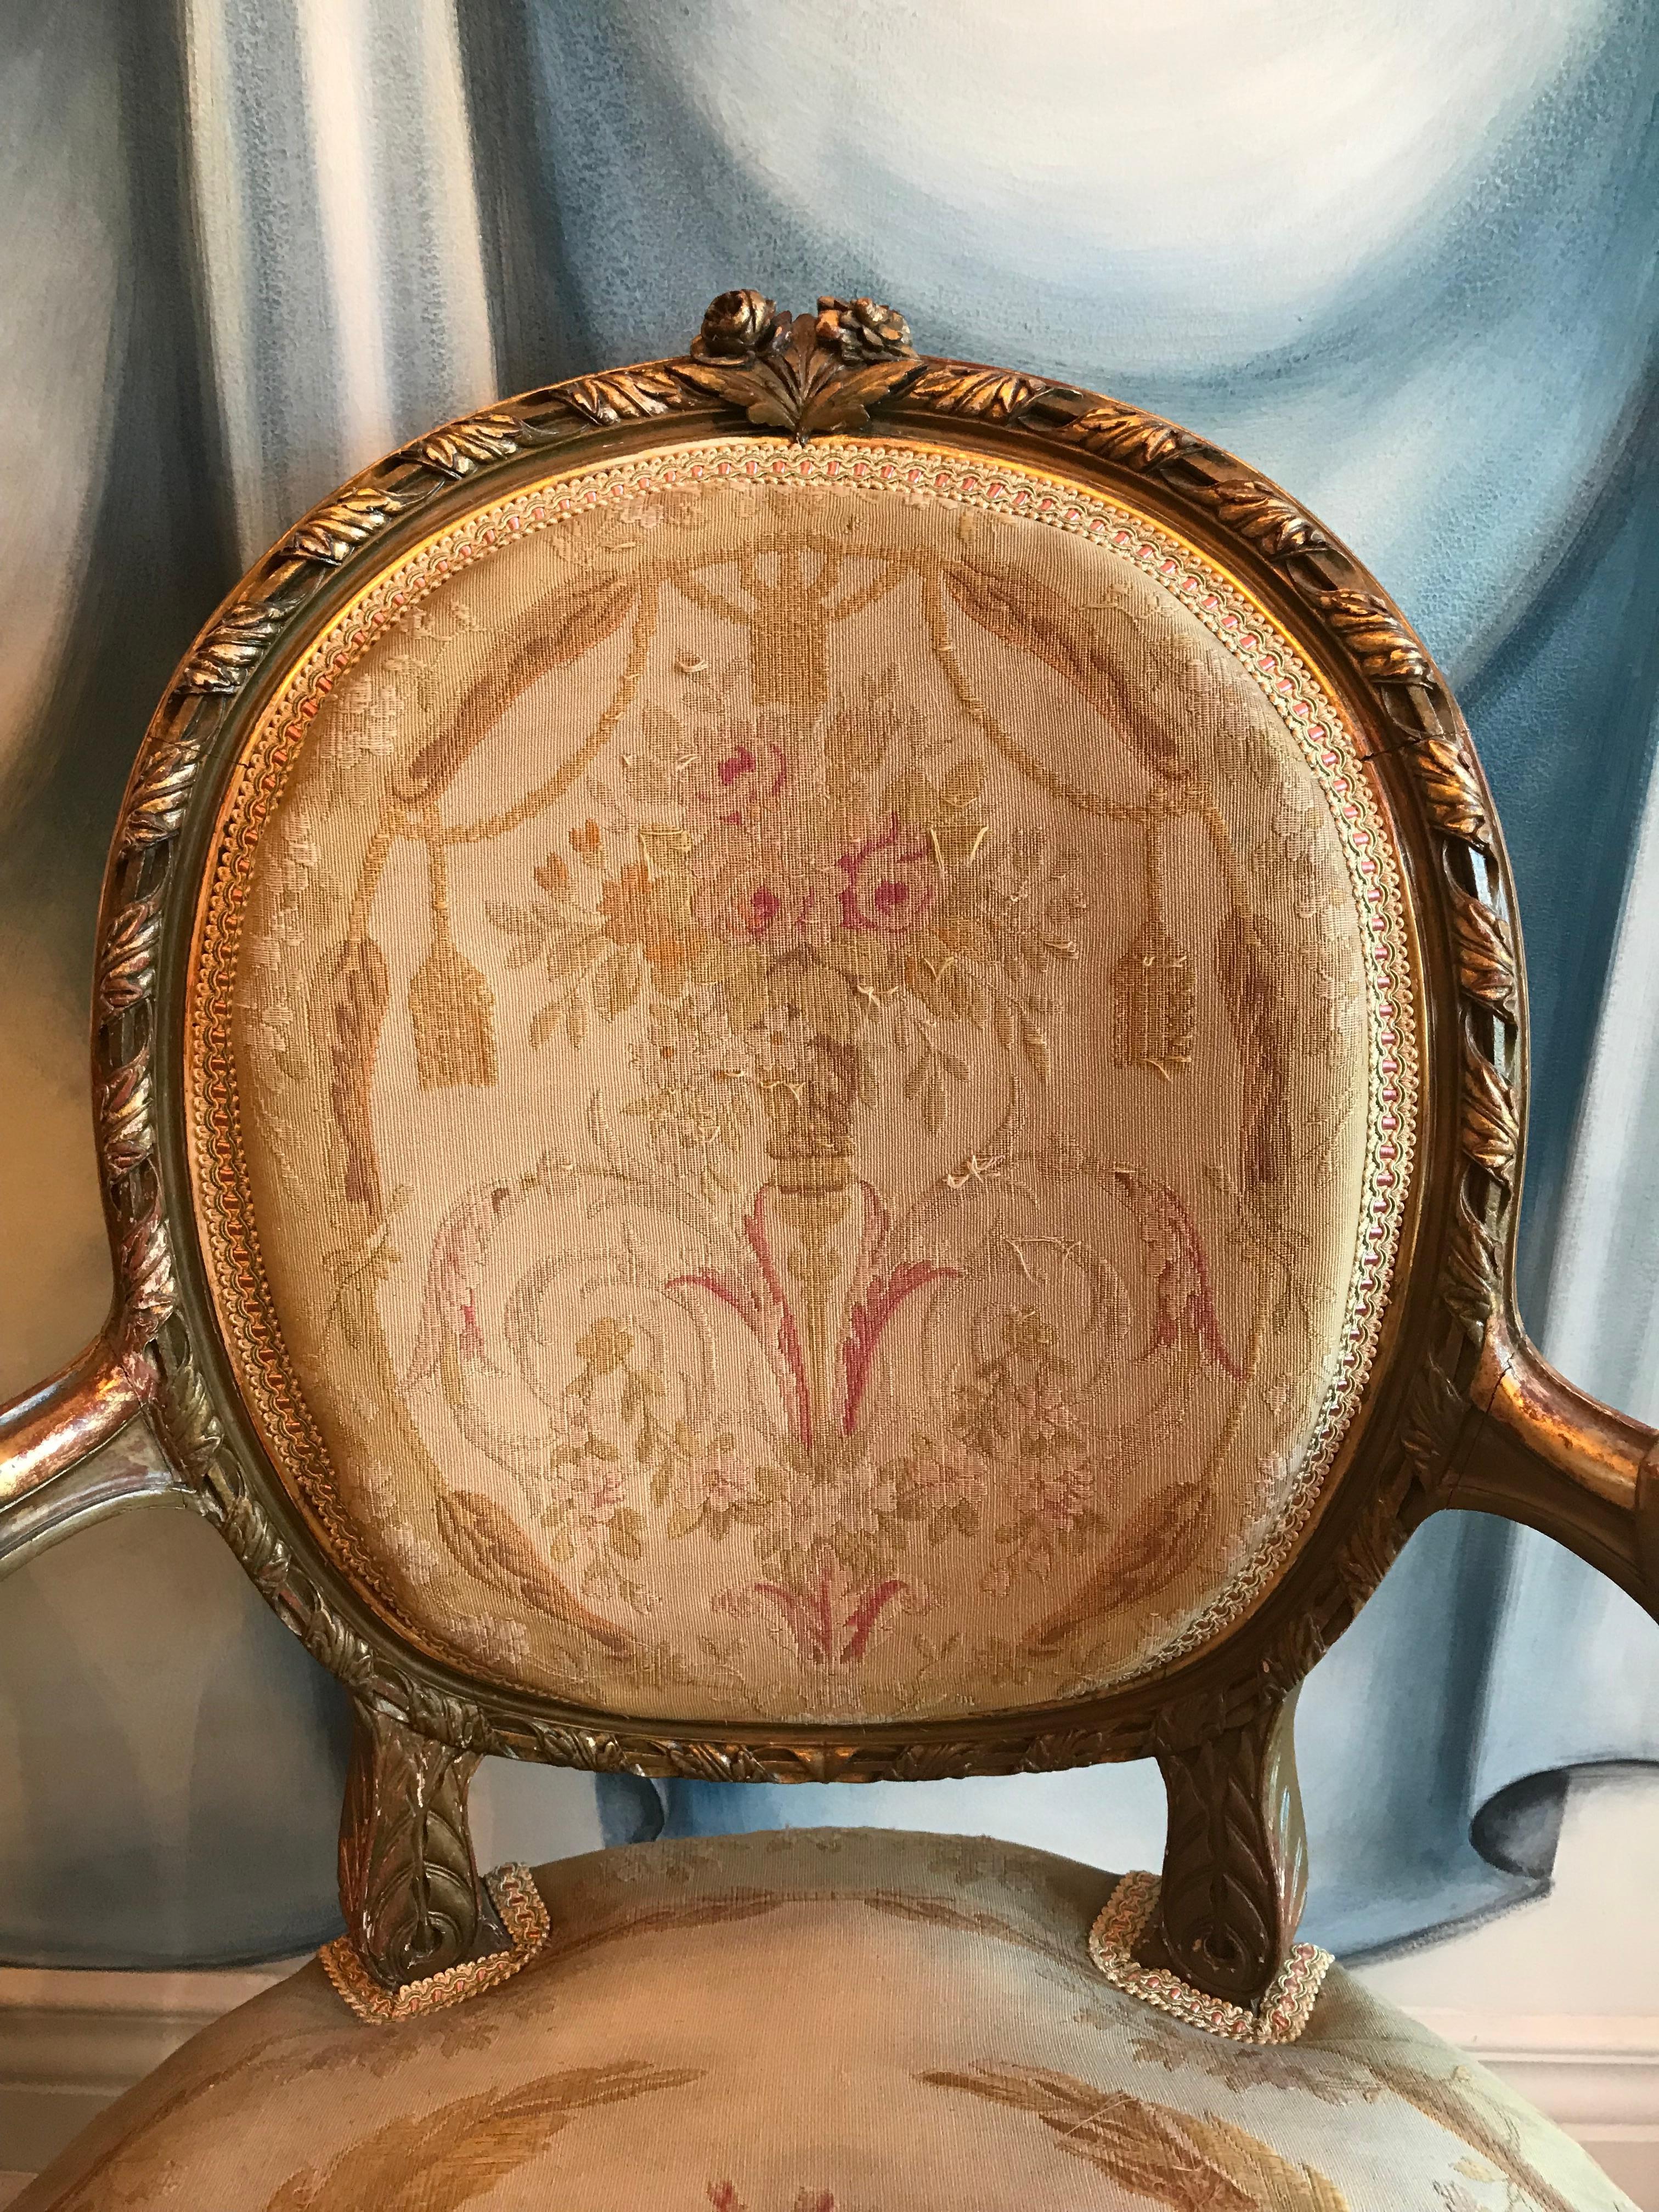 Pair of Louis XVI fauteuils, giltwood with beautifully carved details. Exquisite original gobelin fabric, the gimp has been replaced. In good condition.